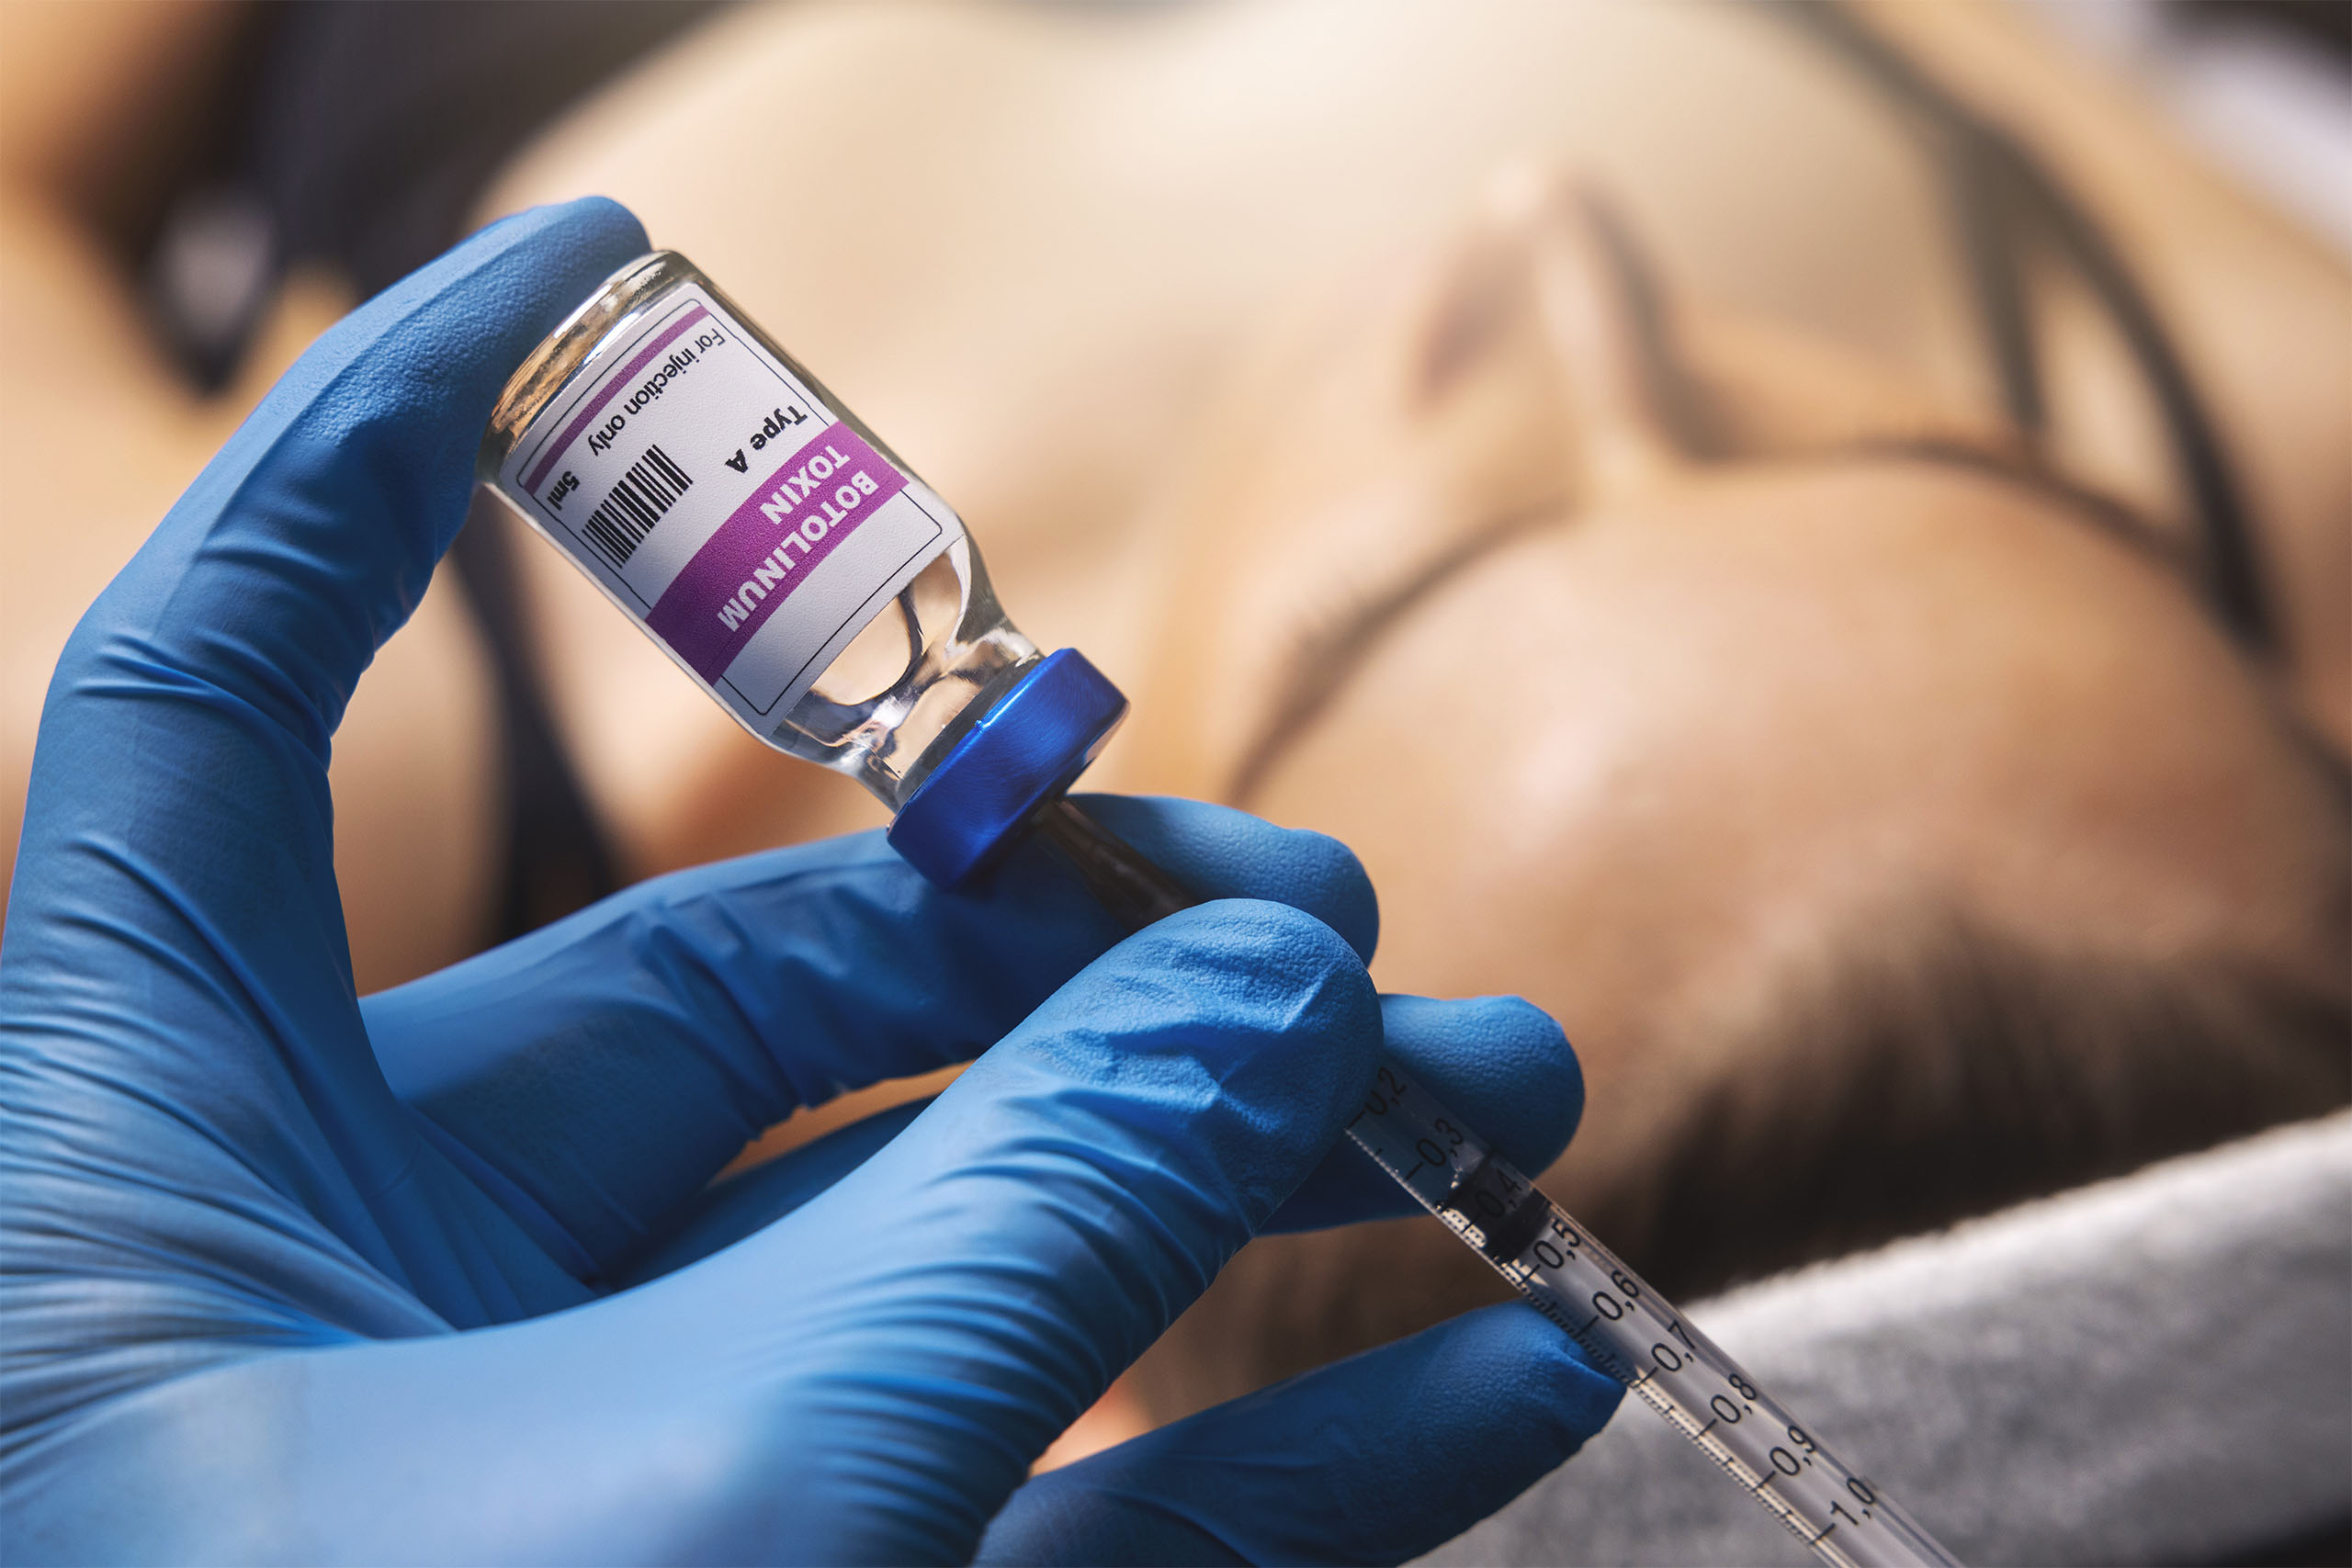 Cosmetic botox injection, filling syringe with botulinum toxin